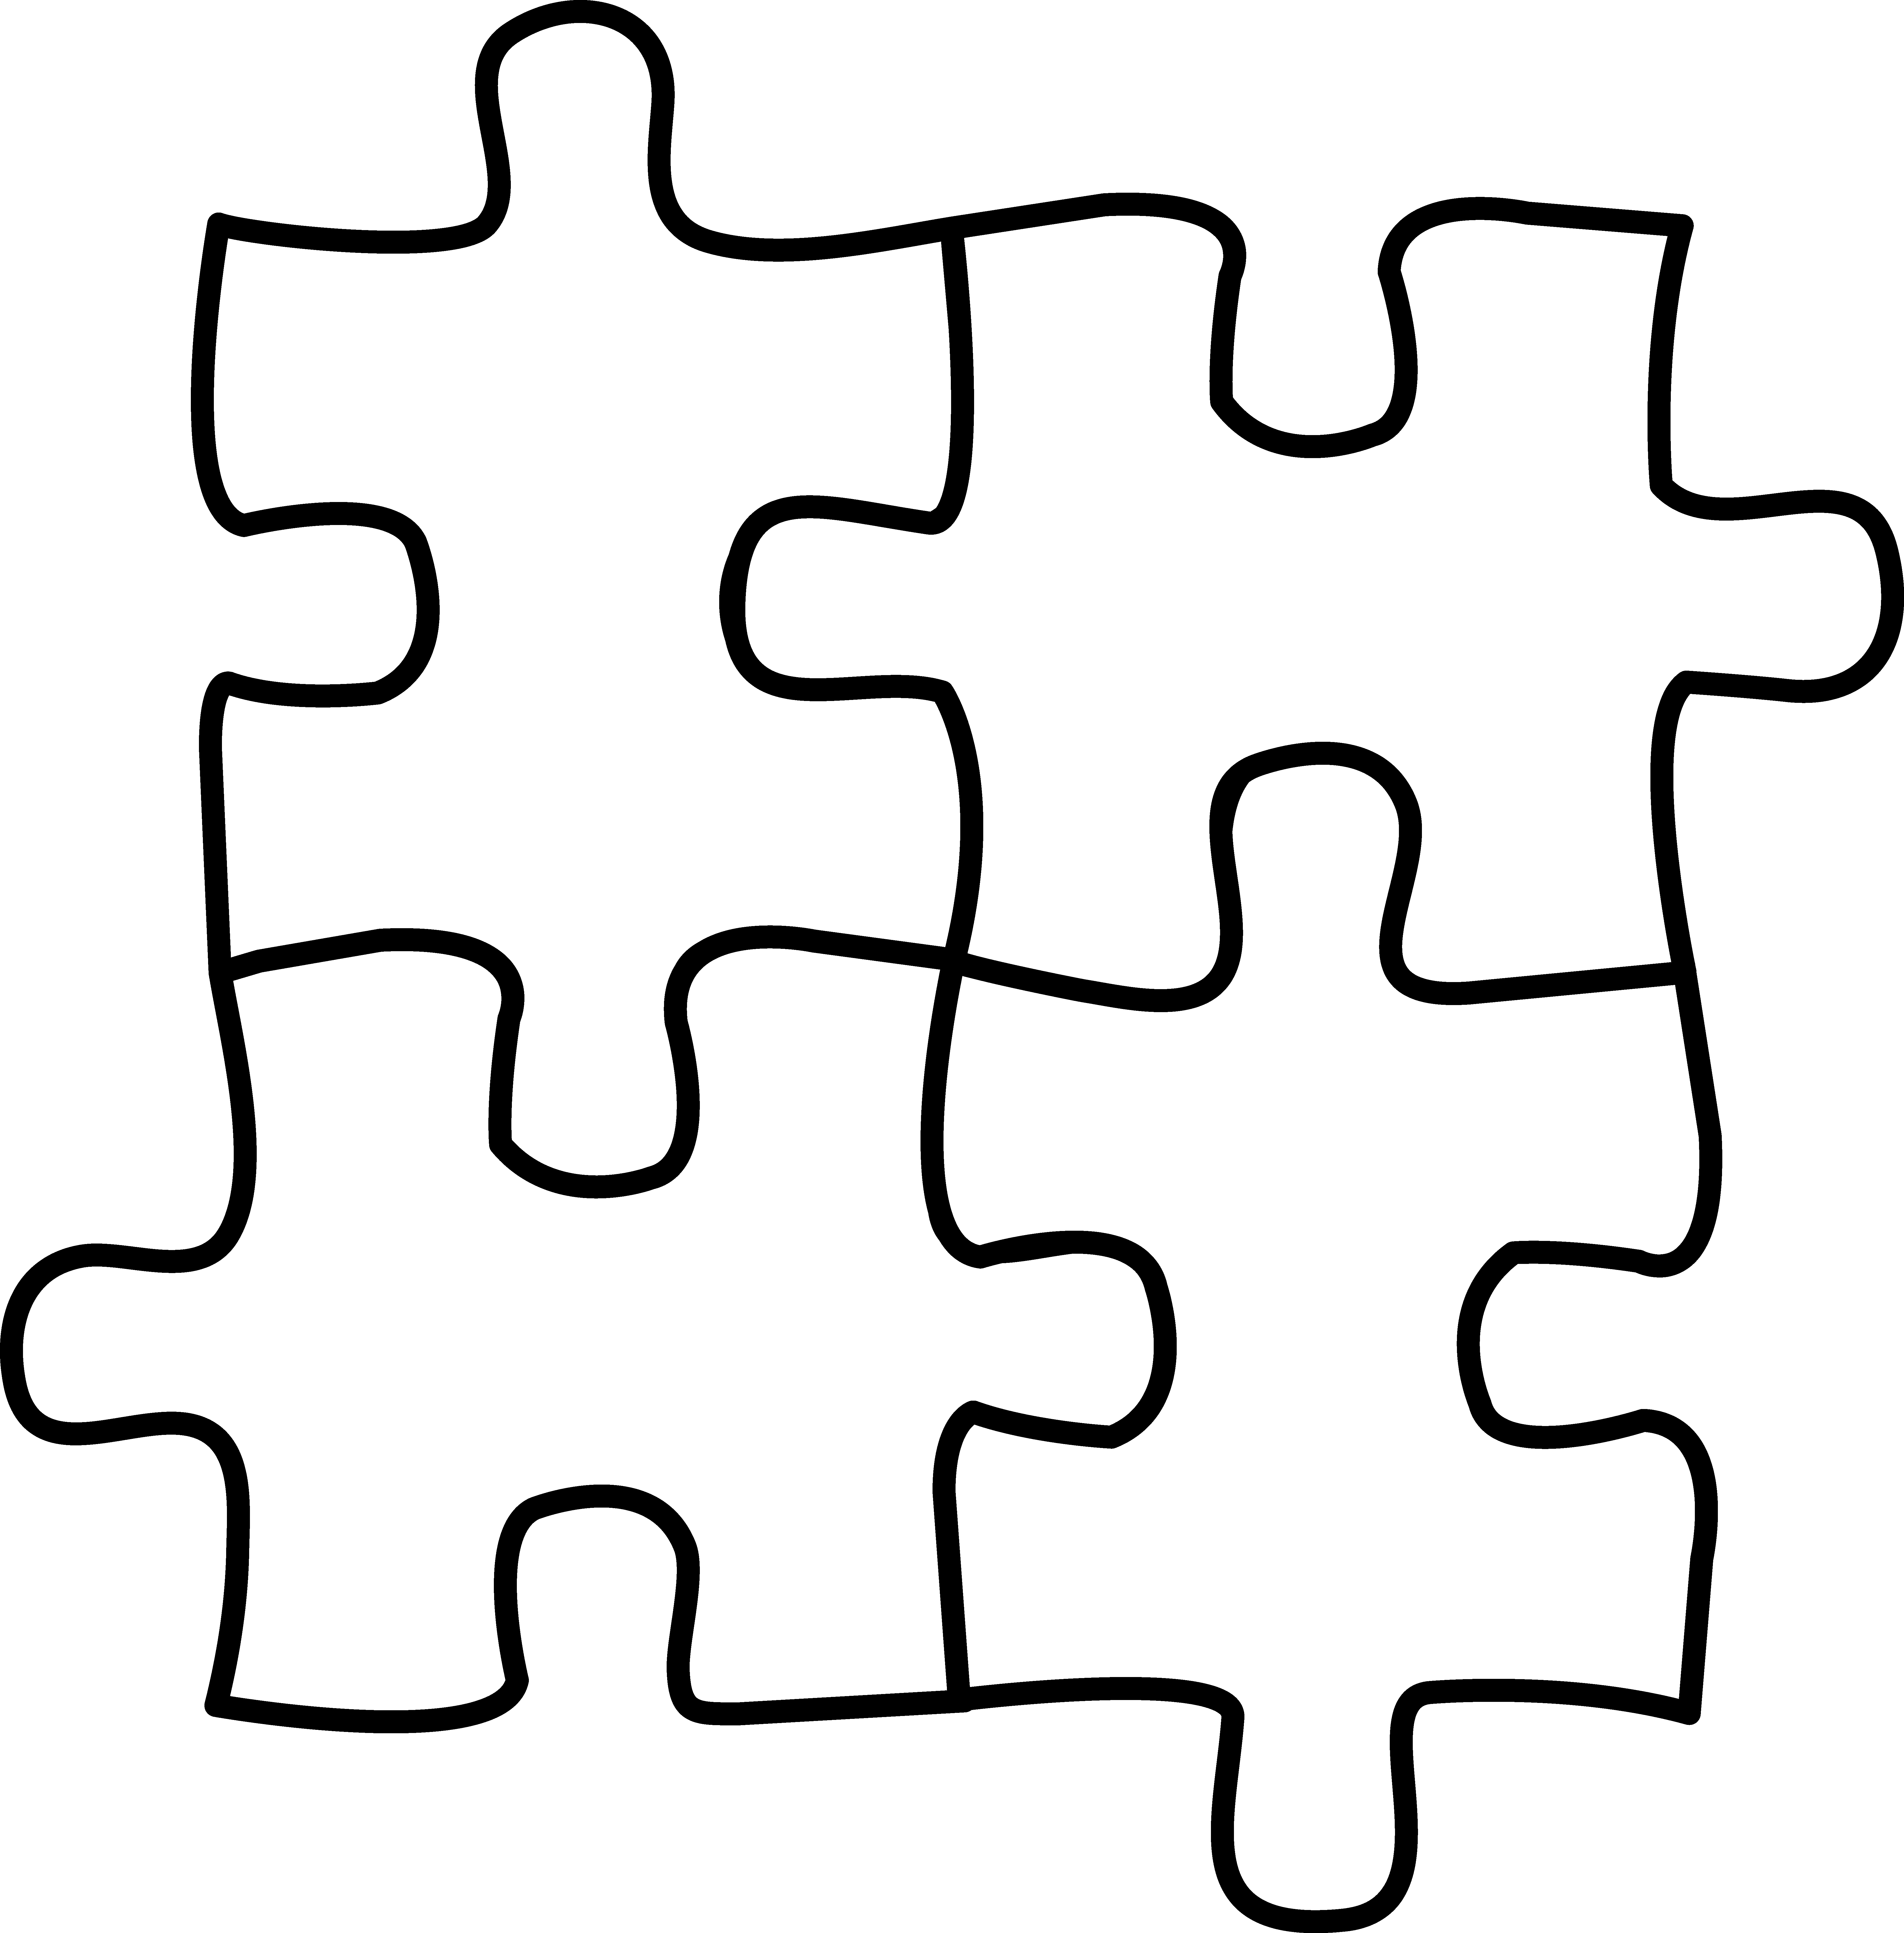 4 Piece Puzzle Clipart - Clipart library